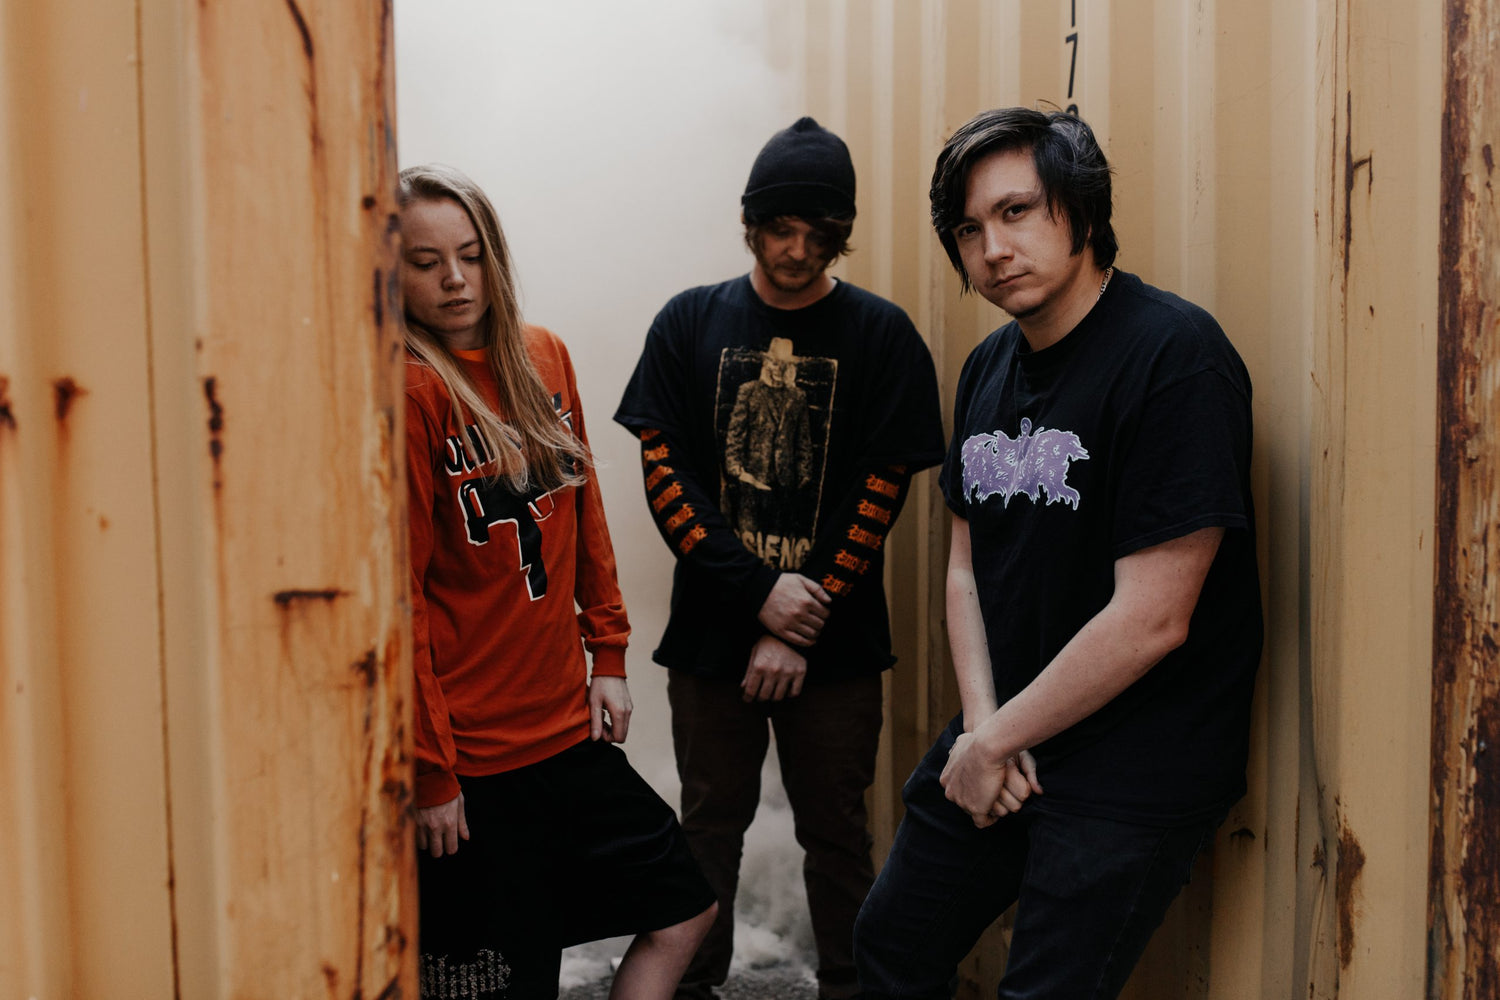 VCTMS kick off 'Bad Luck Season' with their latest banger "Carefully // Caged"